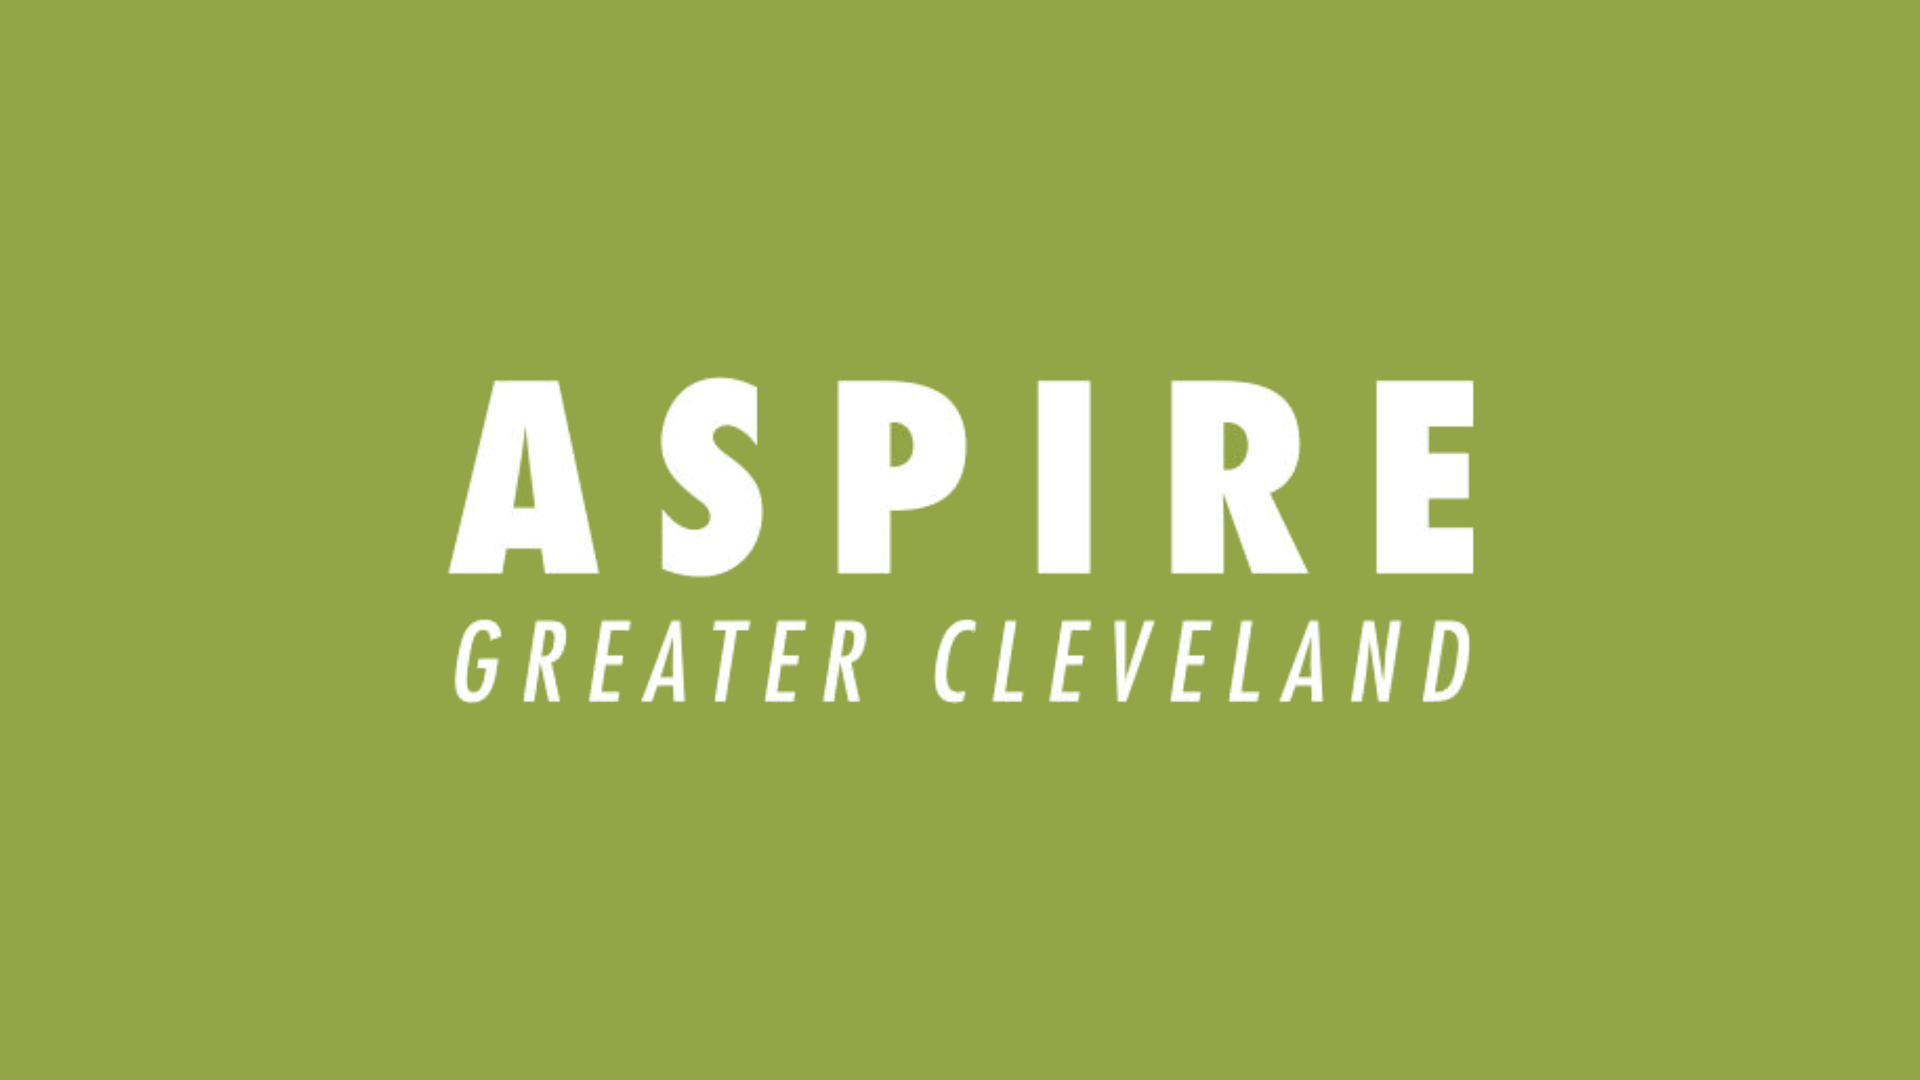 The Spanish American Committee is a partner of the Aspire Greater Cleveland program